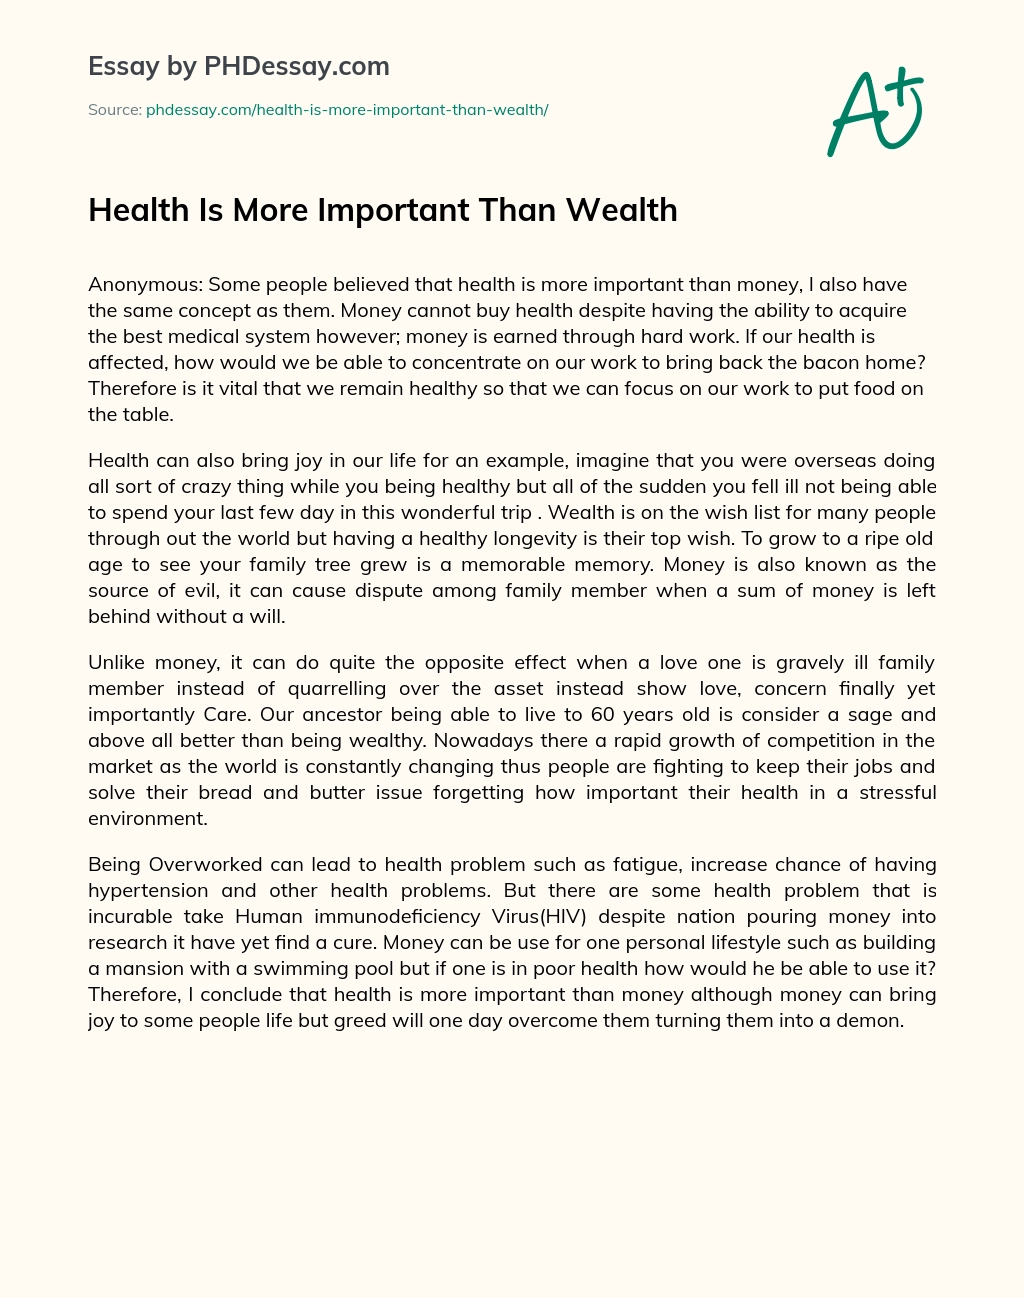 Health Is More Important Than Wealth essay